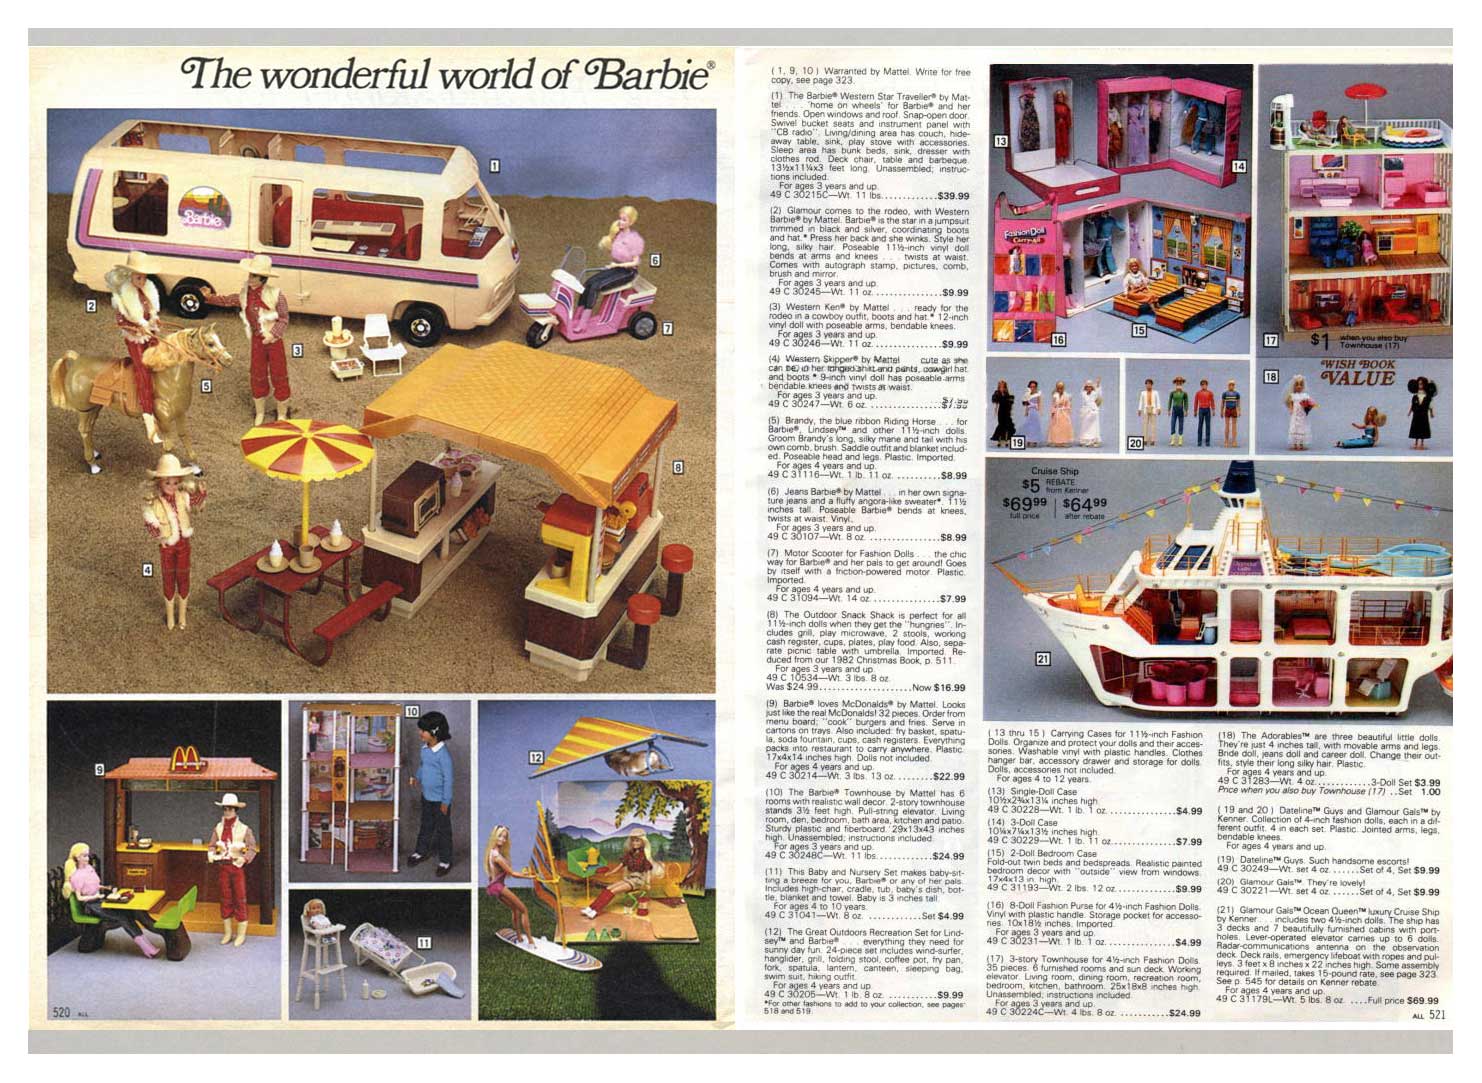 From 1983 Sears Wish Book